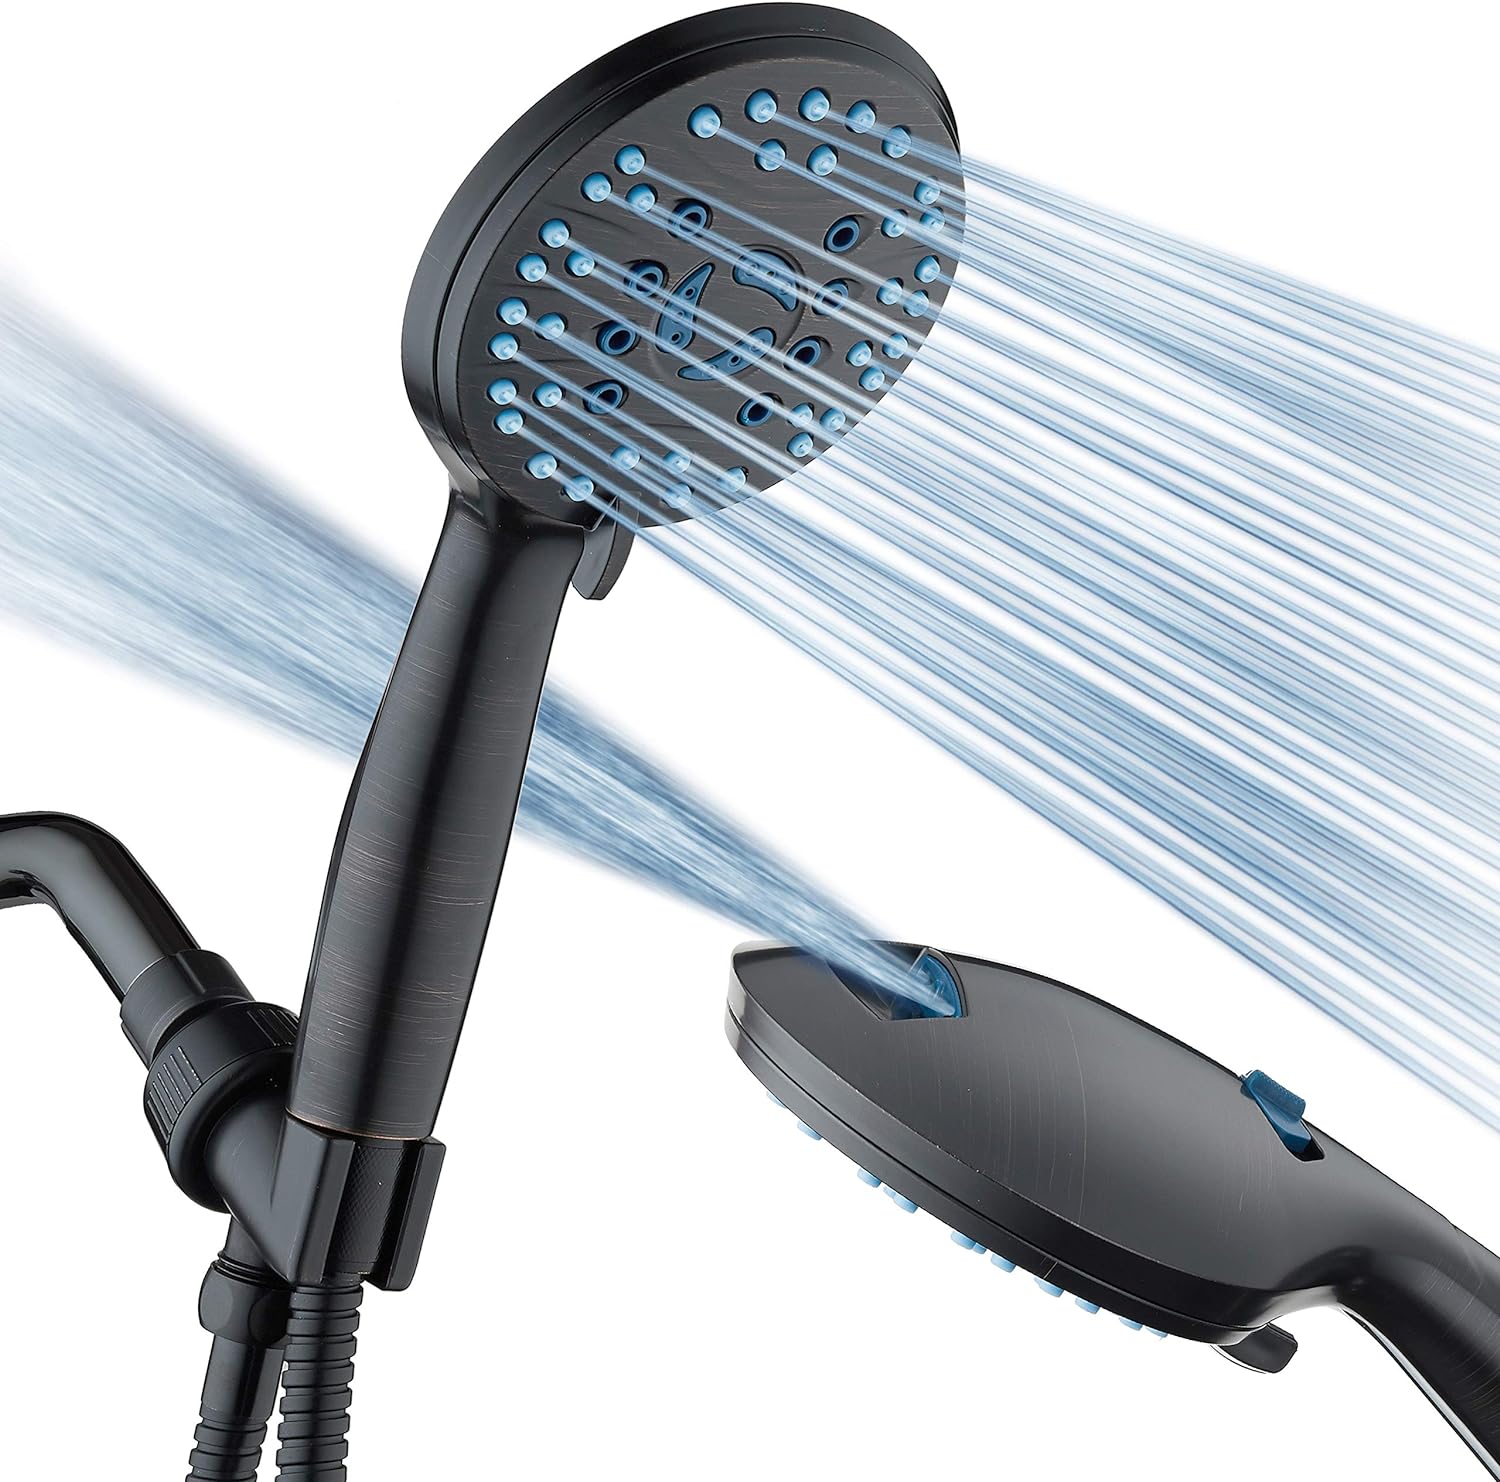 The AquaCare Handheld Shower Head is the best handheld shower head I've ever owned. The quality, appearance, and features of this shower head meet or exceed competing shower heads that are twice as expensive.PROS:Excellent quality.Easy to install.Excellent water spray options.Includes a built-in power wash option, in which water will spray from a high-pressure nozzle out of the back of the shower head. This is really useful for things like washing pets, cleaning shoes, and cleaning the shower it